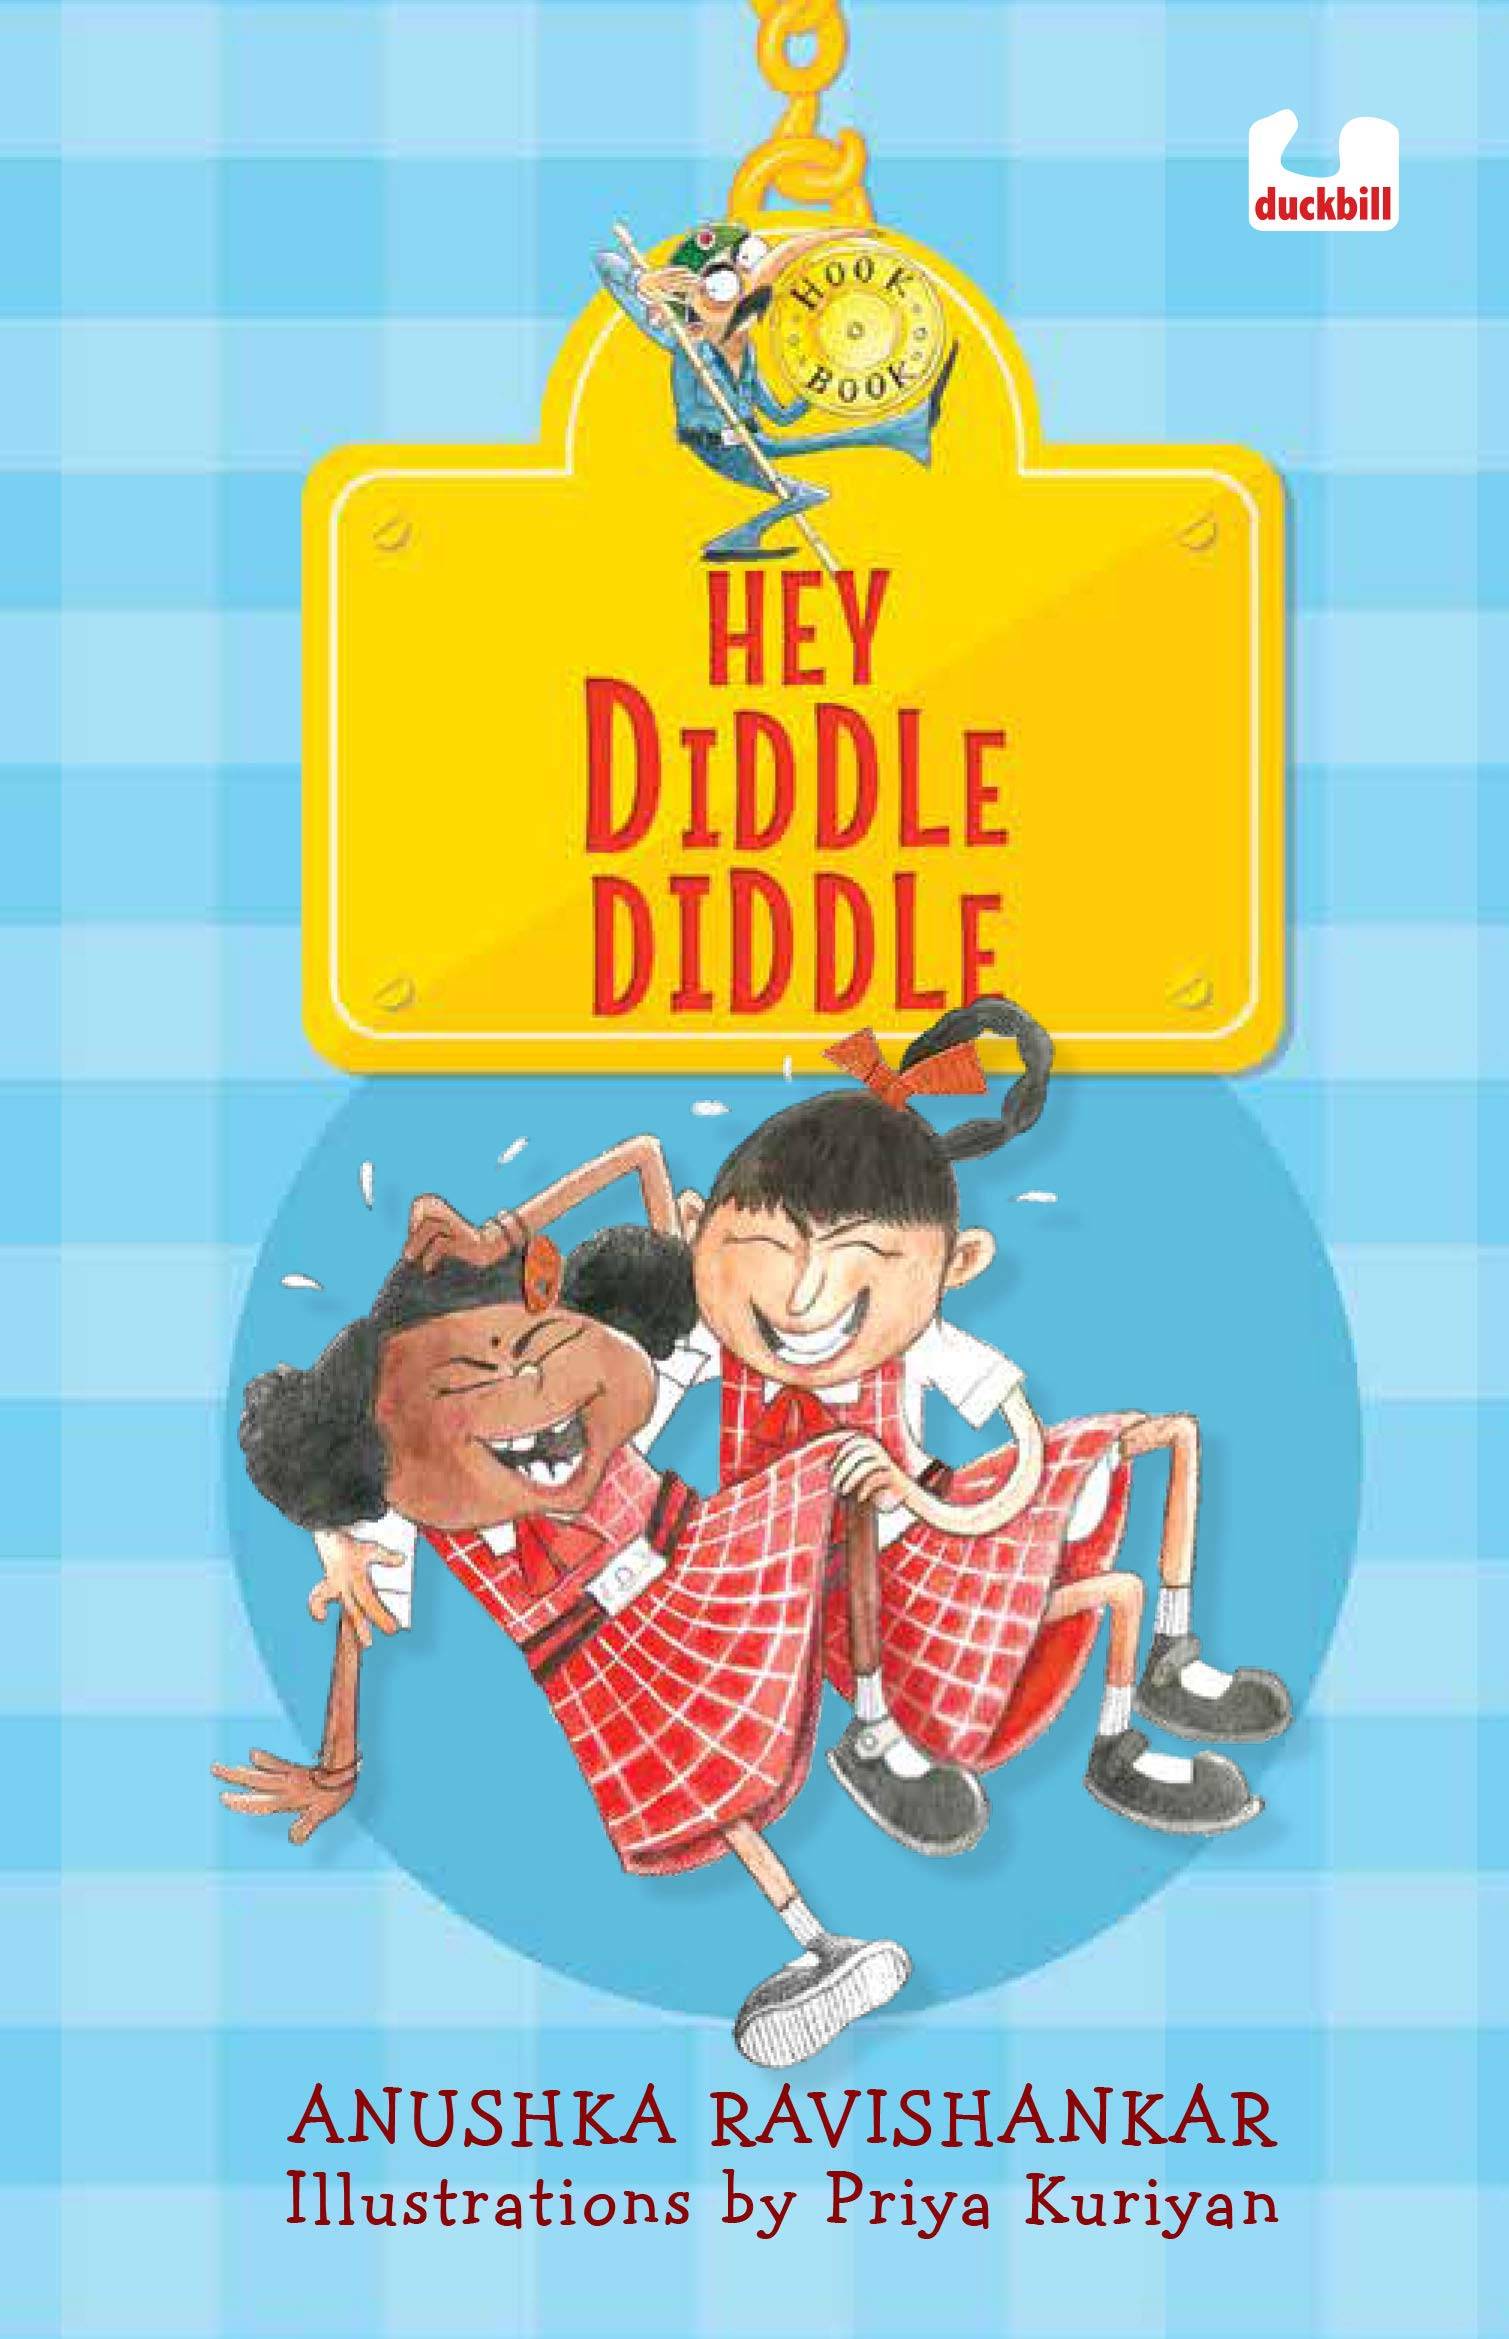 IMG : Hook Book Hey Diddle Diddle